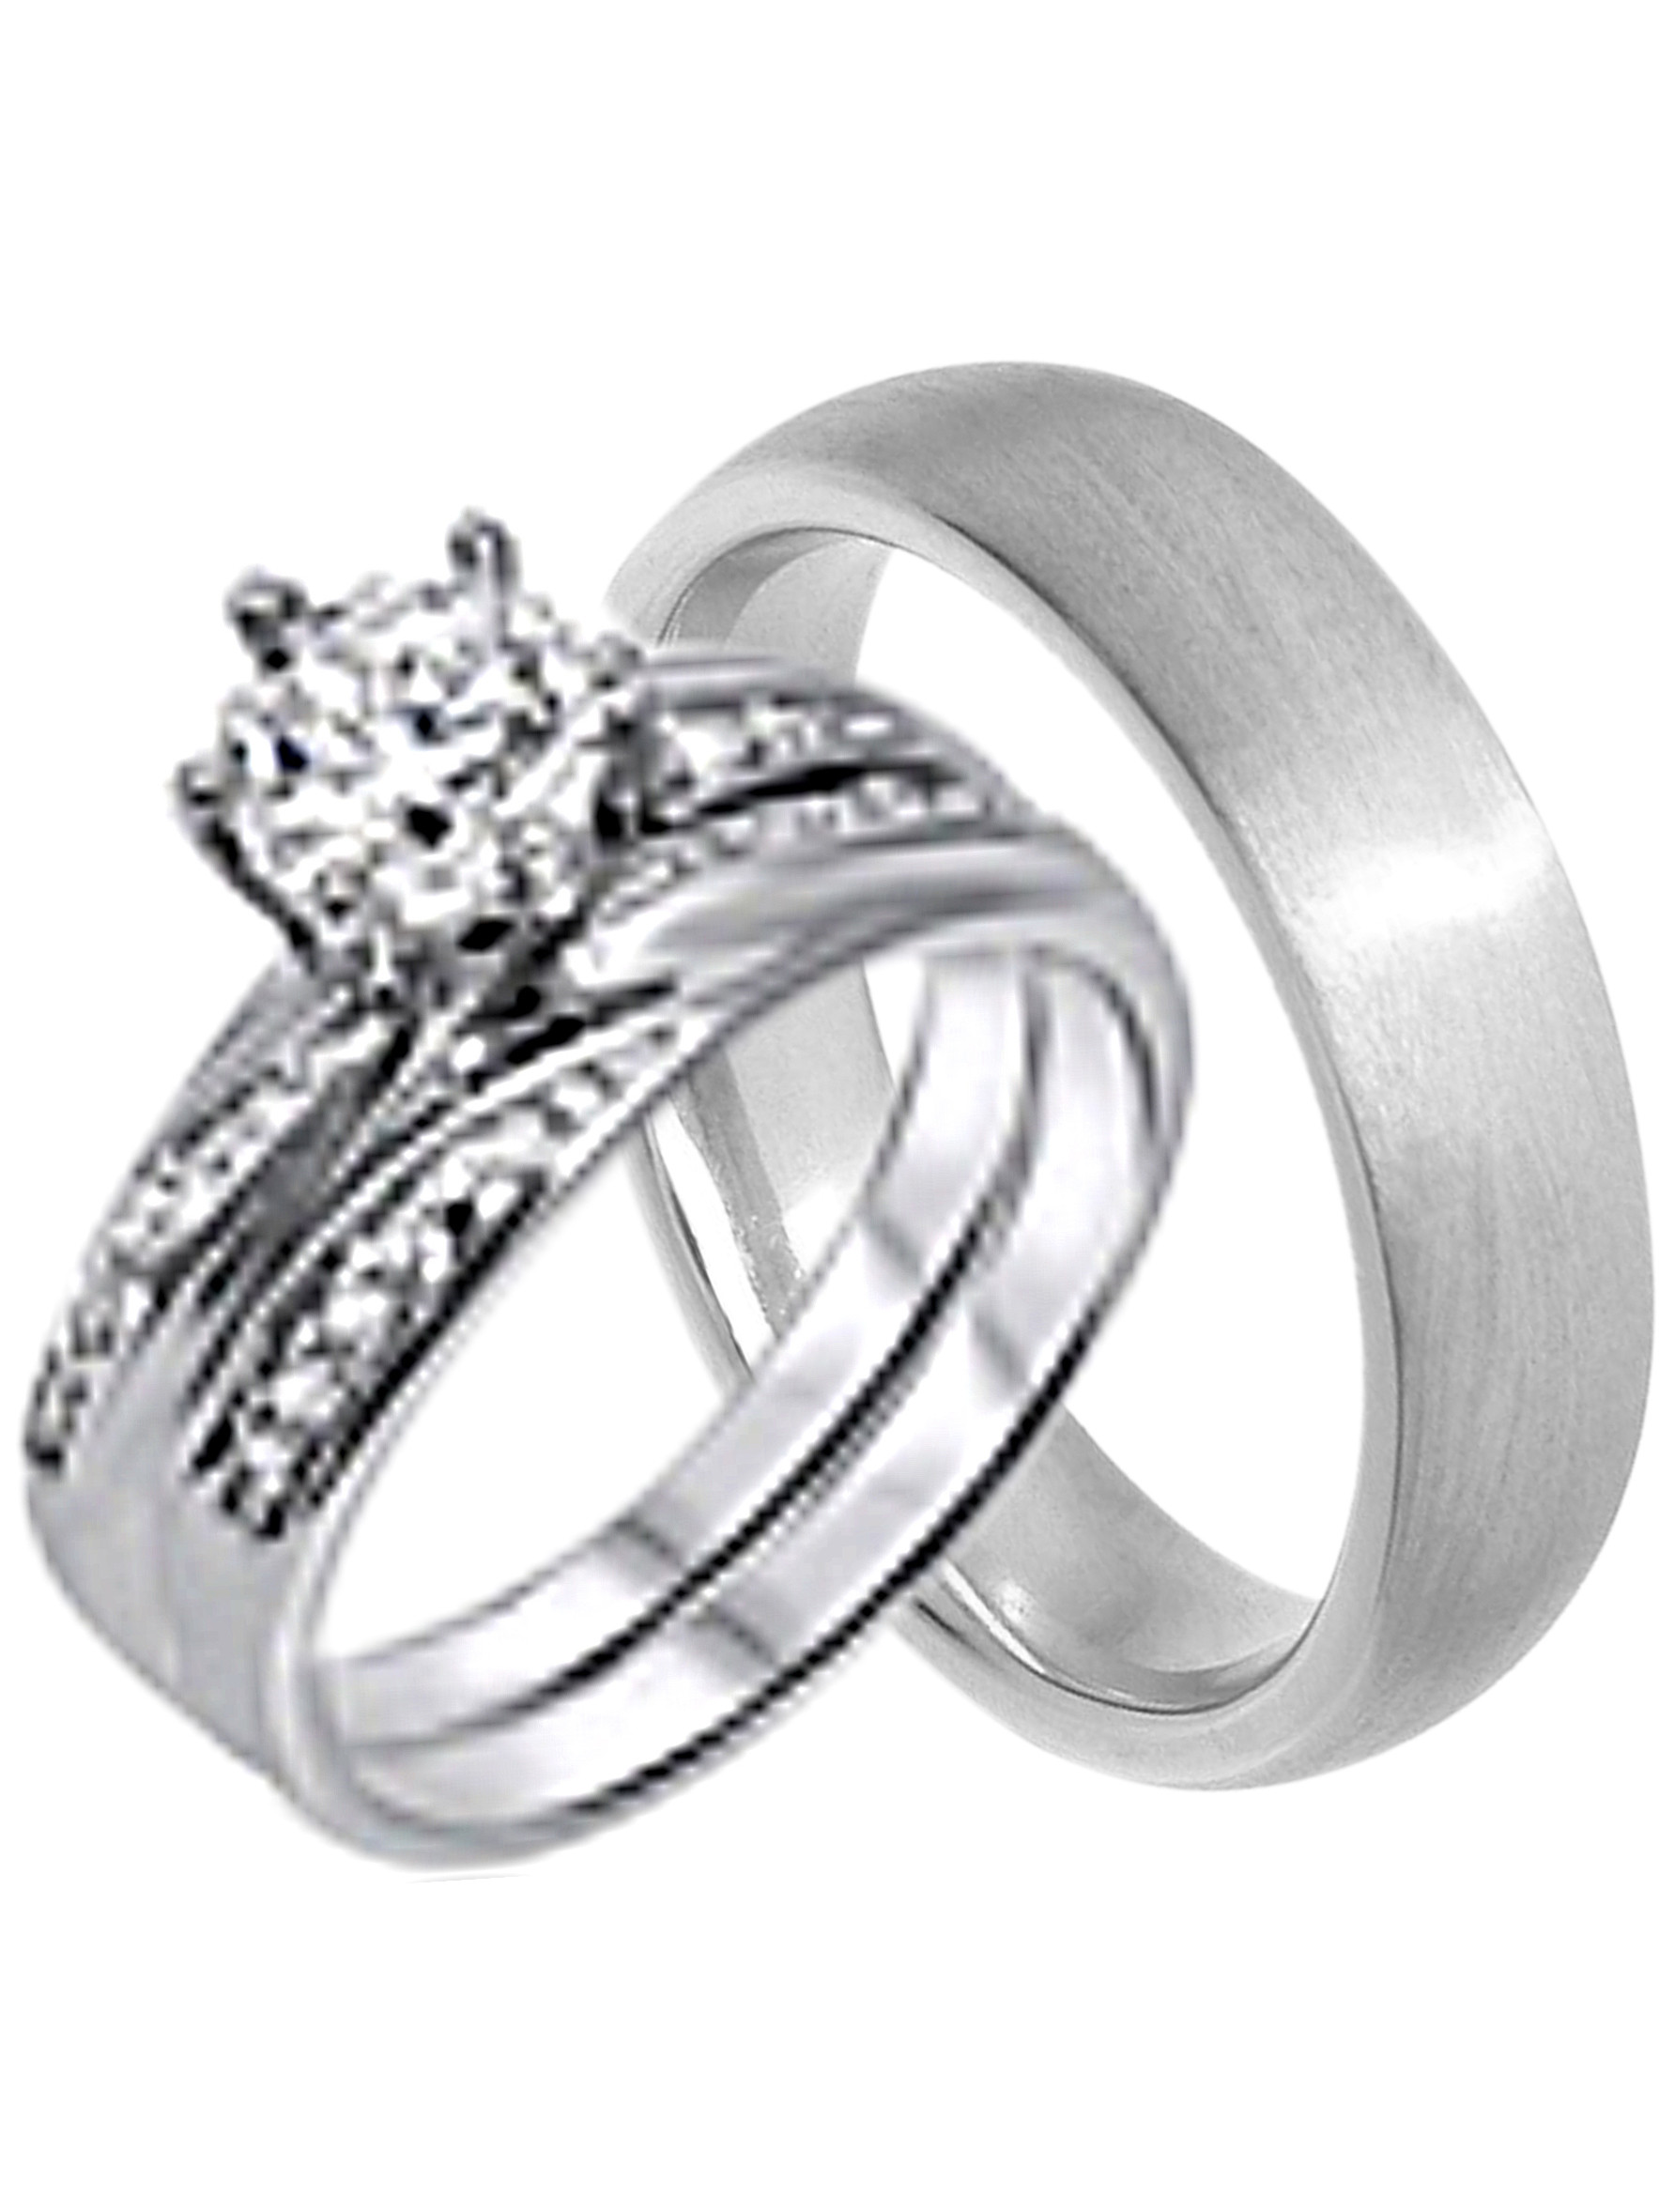 Affordable Wedding Rings For Him And Her
 His and Hers Wedding Ring Set Cheap Wedding Bands for Him